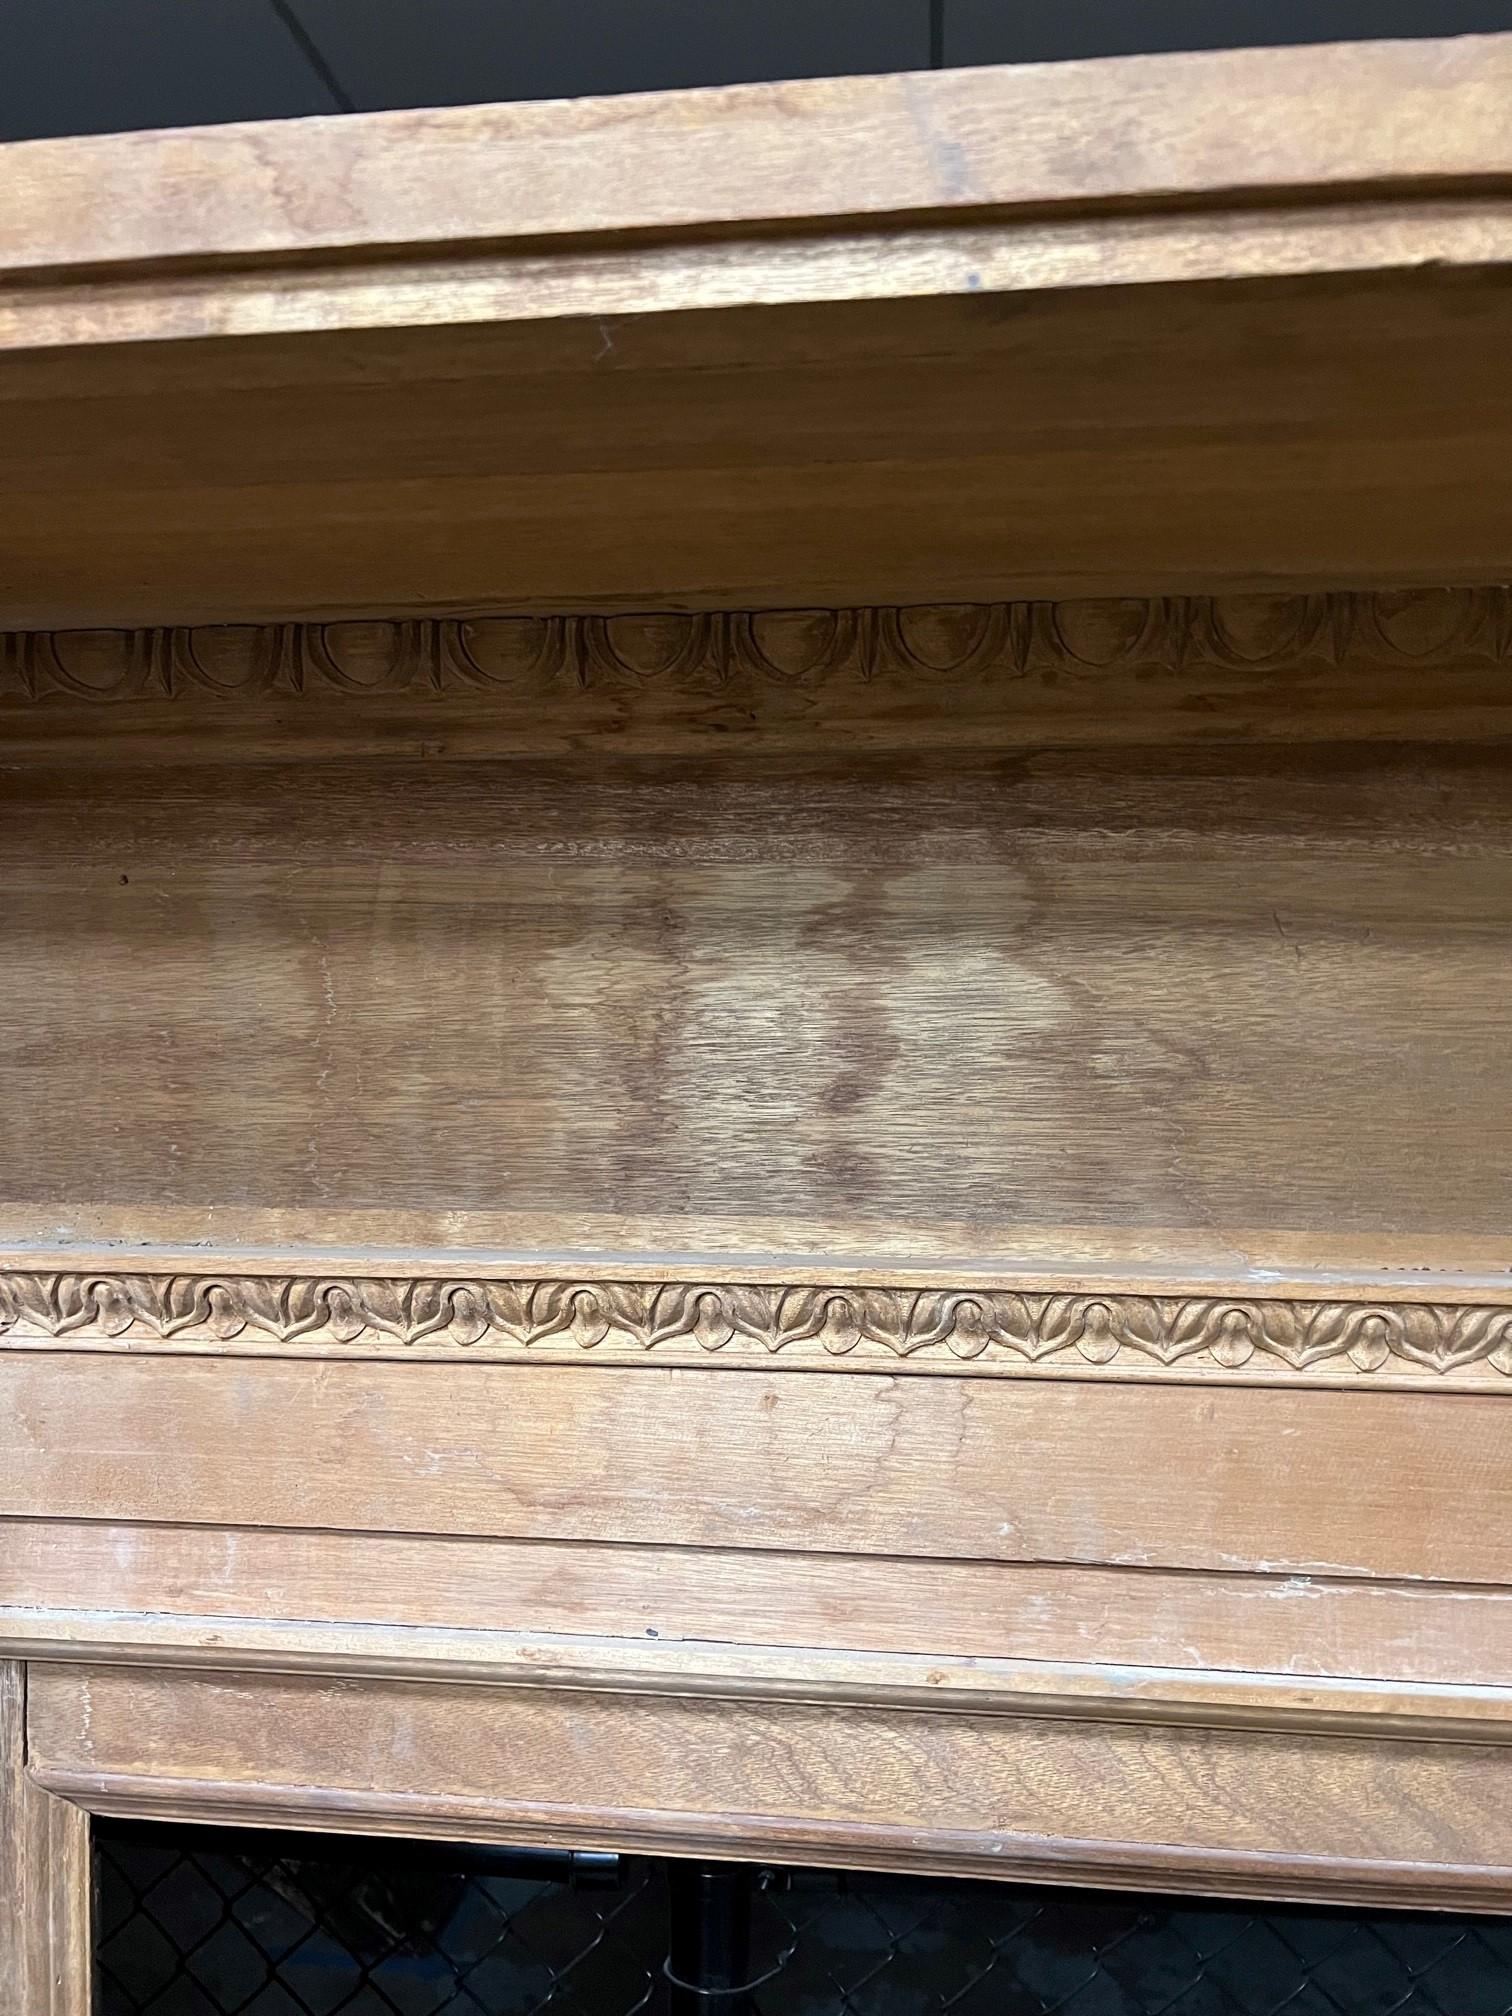 Oversize Carved Wood Fireplace Mantel with Acanthus Leaf Corbels.   13